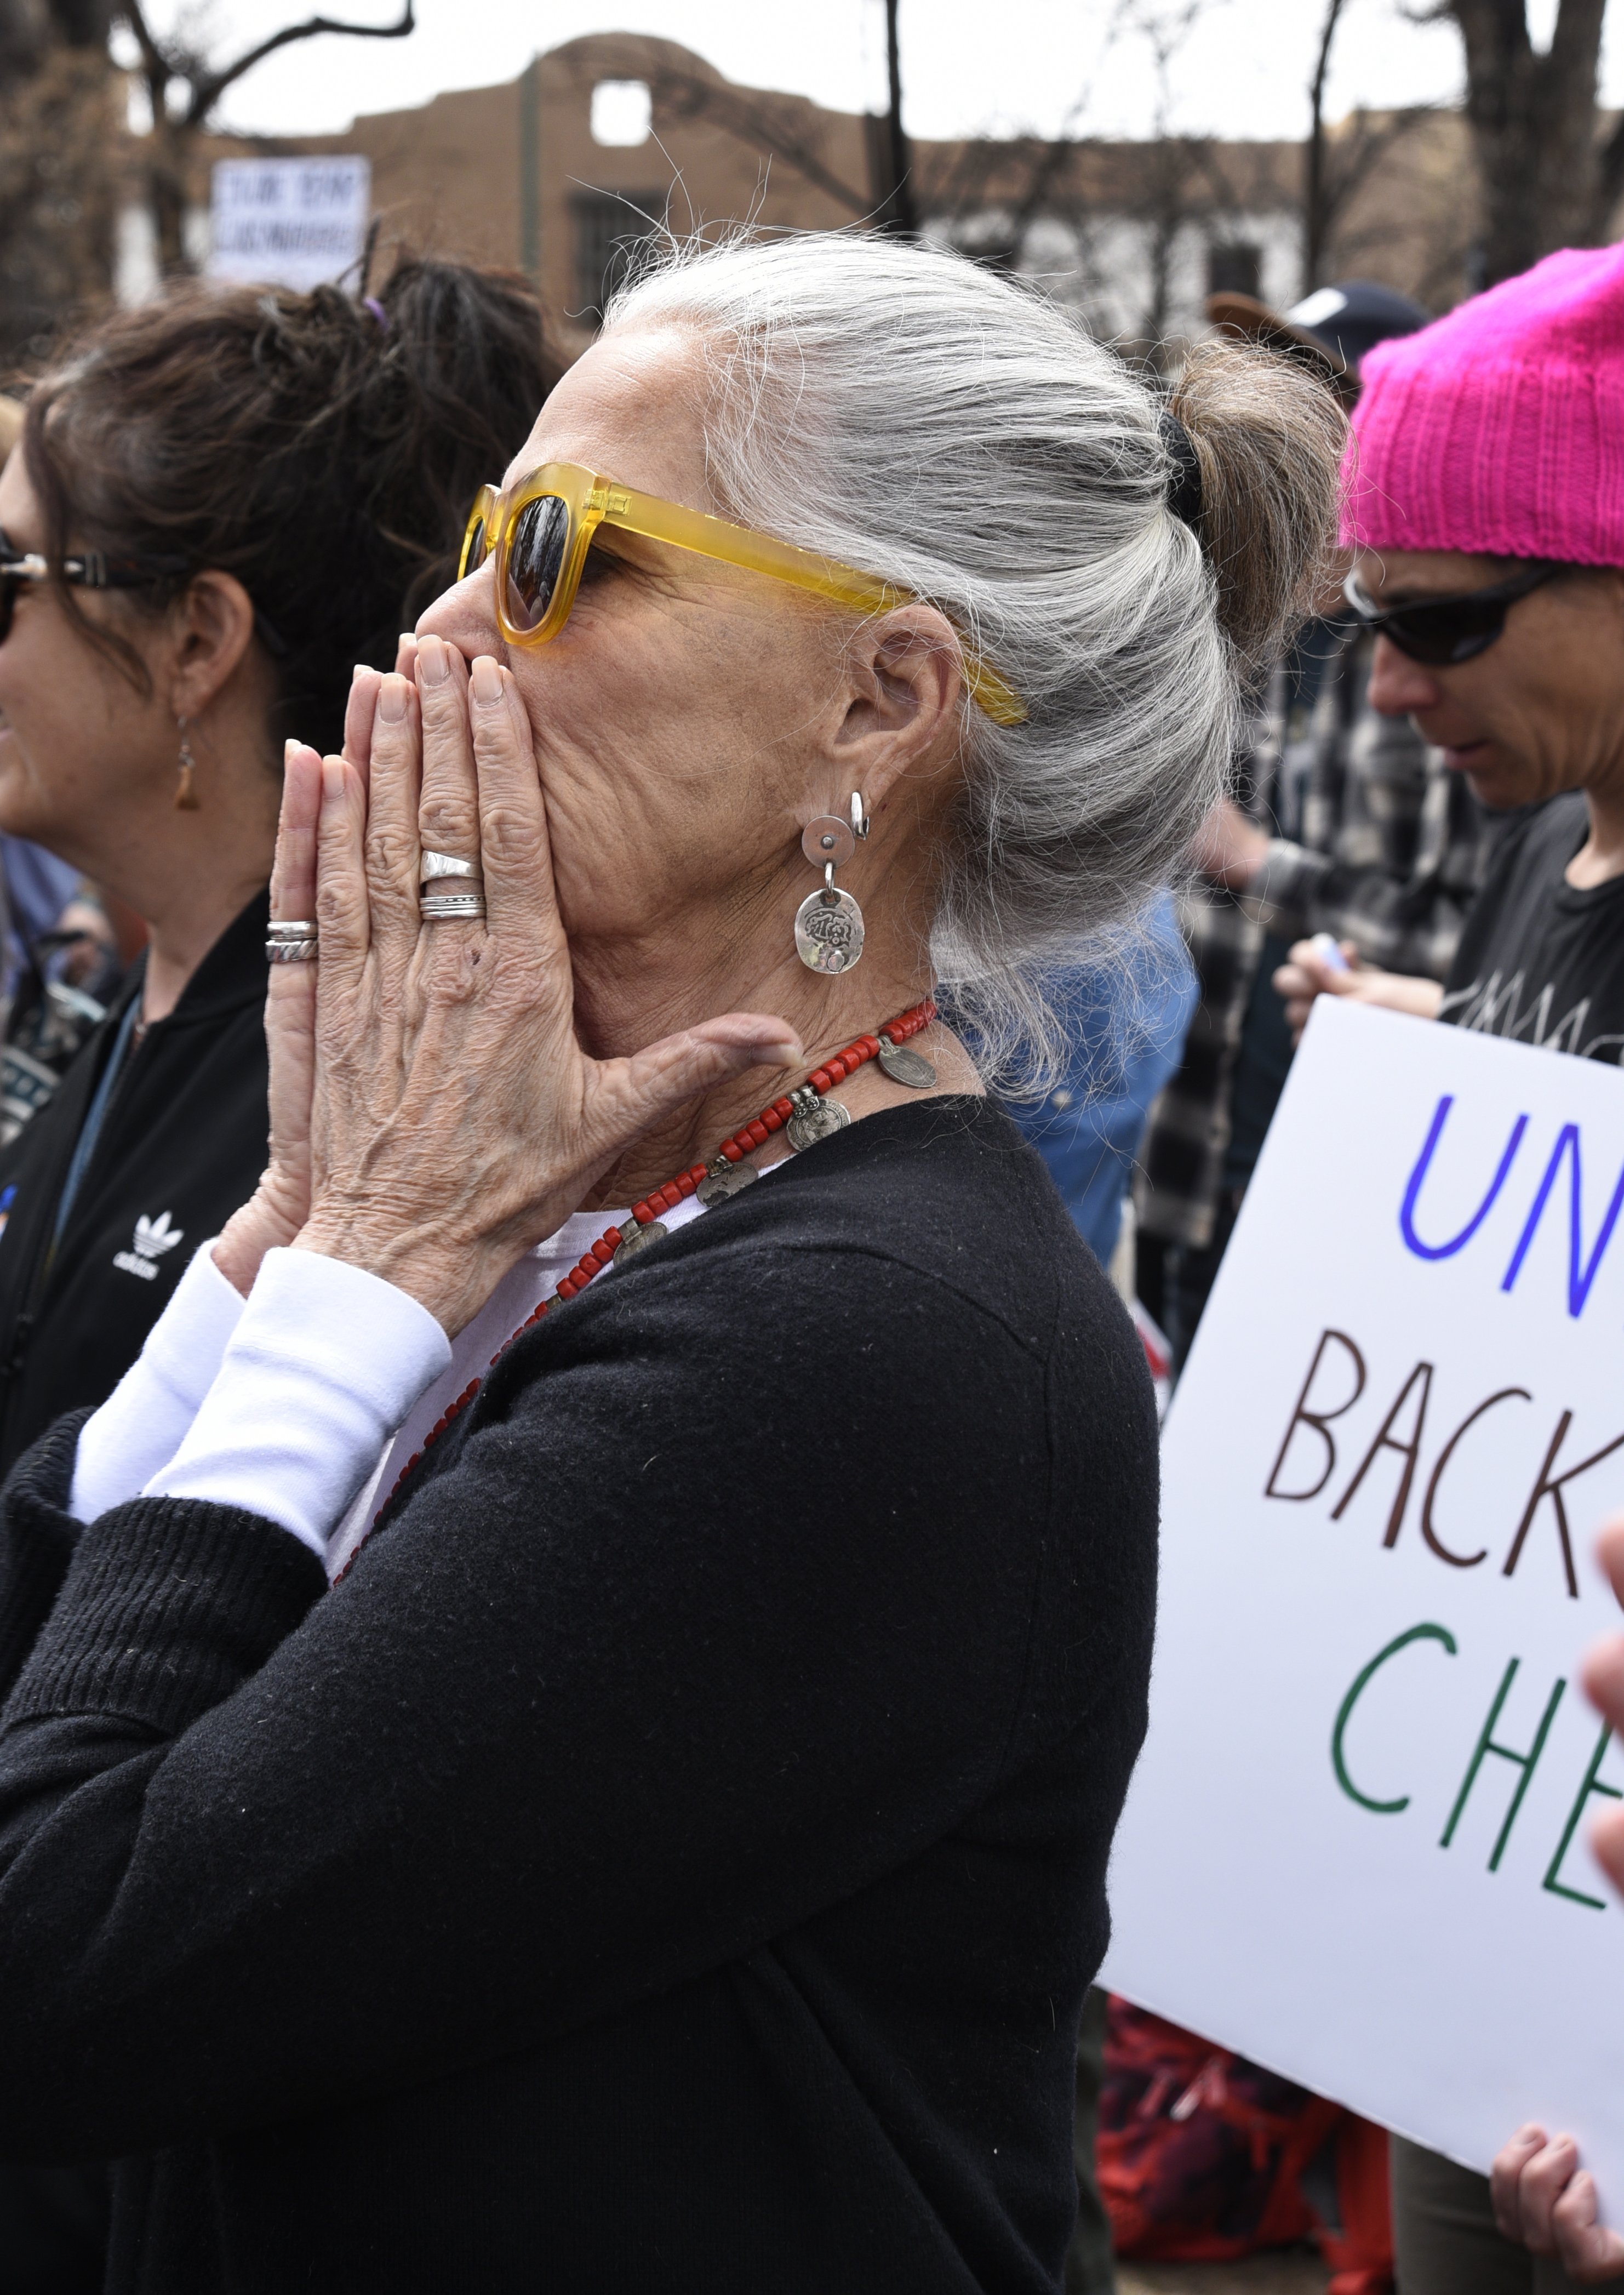 Ali MacGraw reacts to an emotional address by a high school student at a "March For Our Lives" rally on March 24, 2018, in Santa Fe, New Mexico. | Source: Getty Images